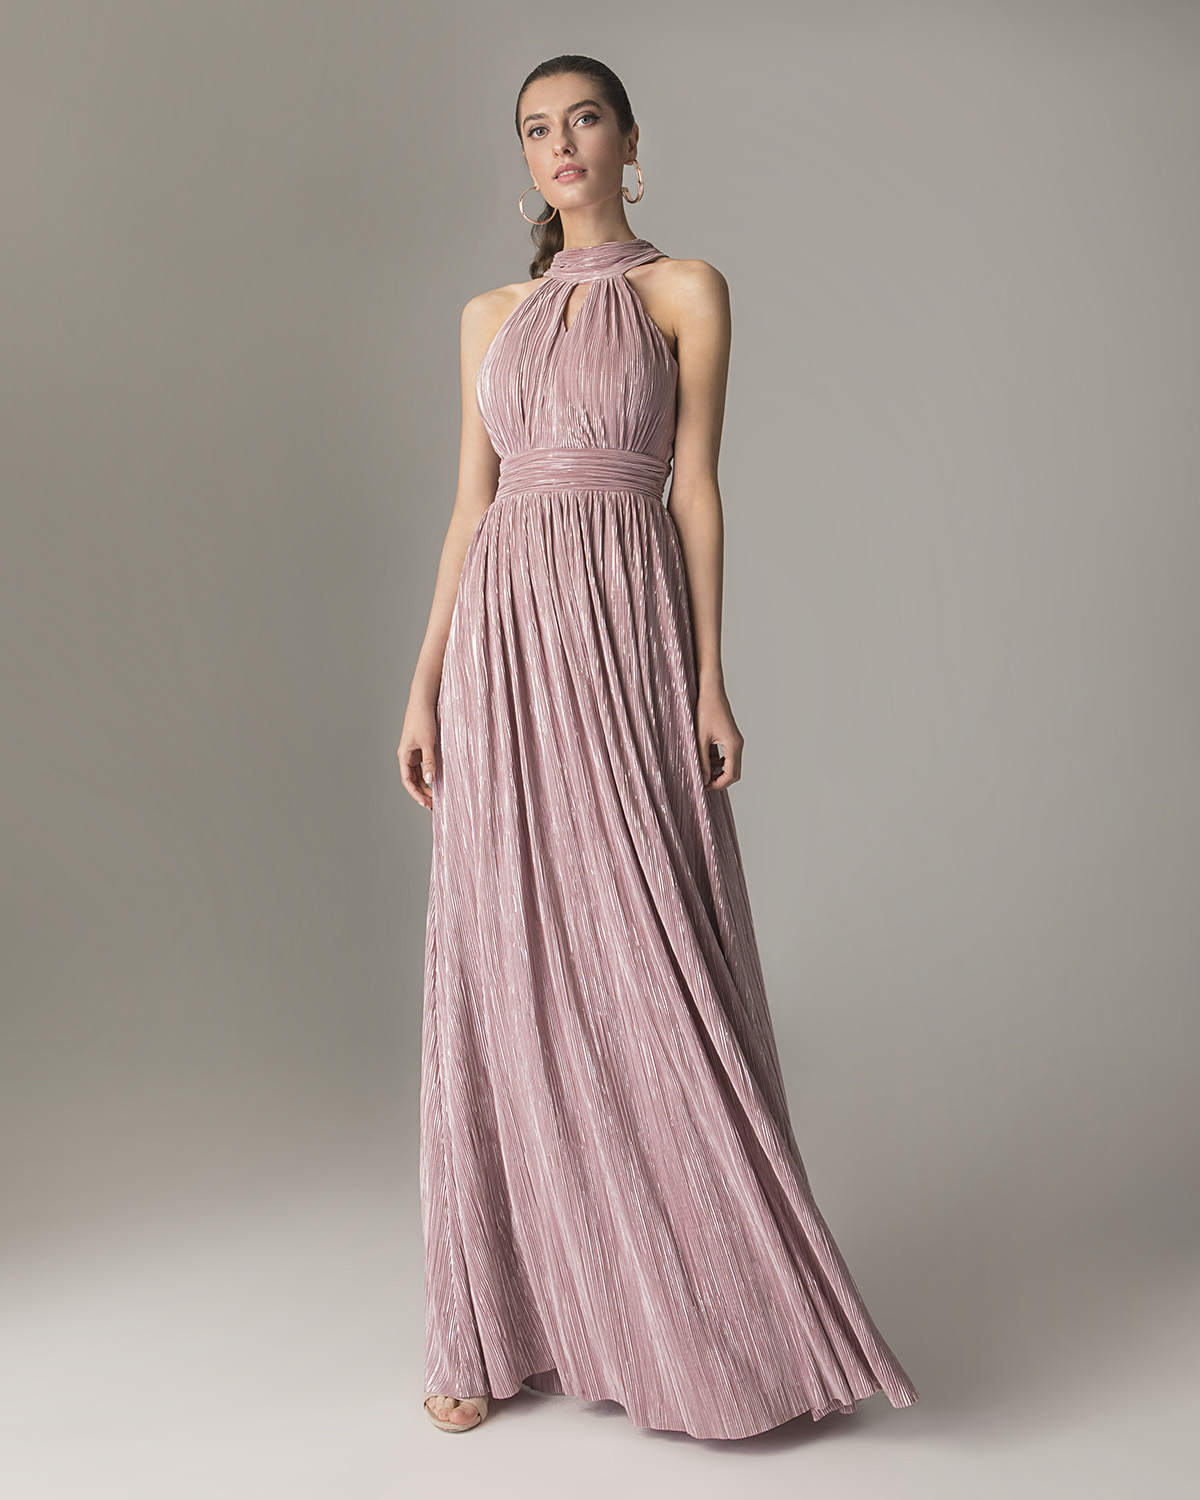 Cocktail Dresses / Long cocktail dress with lurex fabric